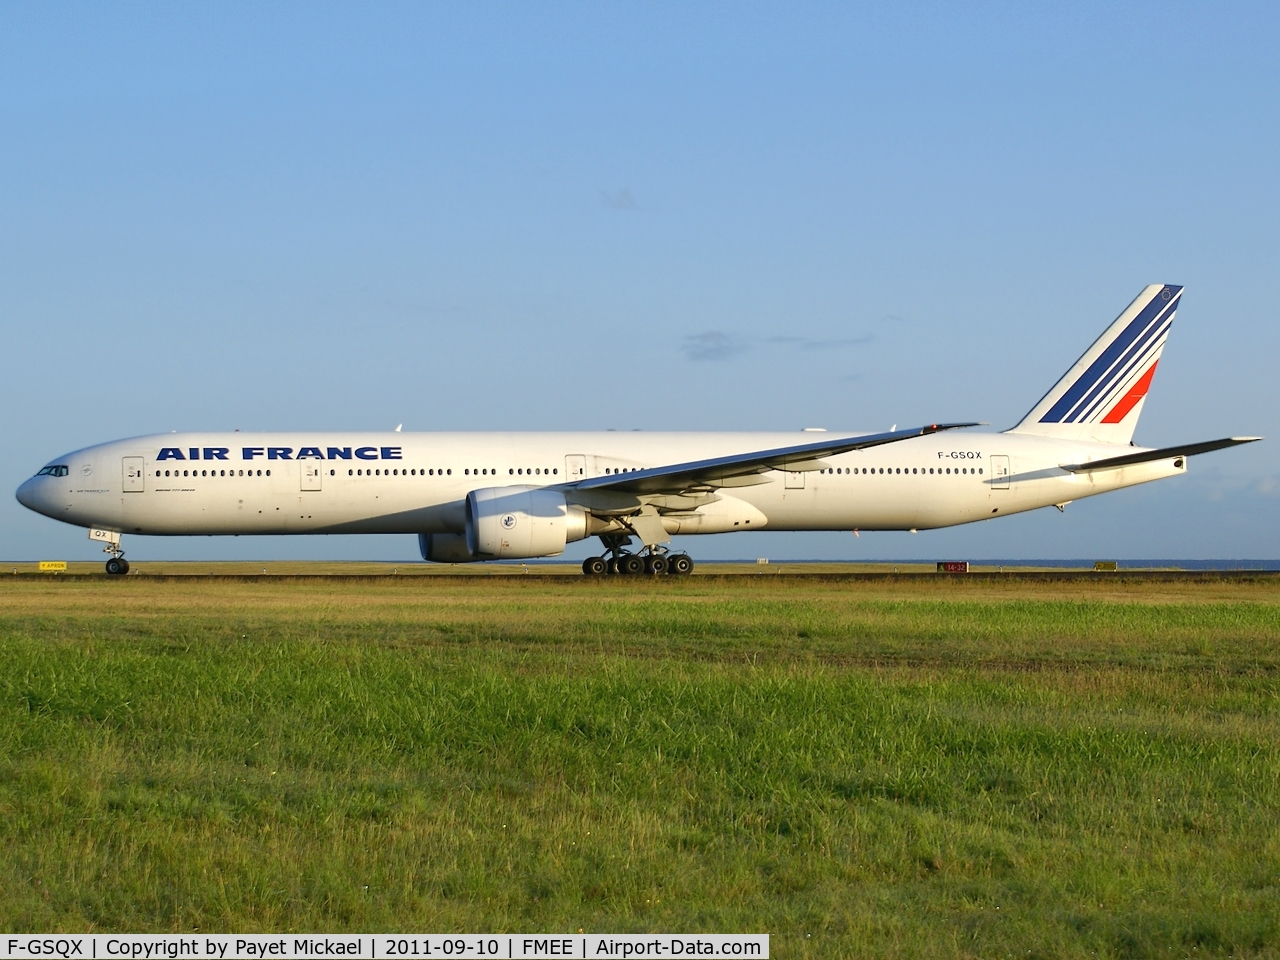 F-GSQX, 2007 Boeing 777-328/ER C/N 32963, Arriving at Sunrise from Paris-Orly